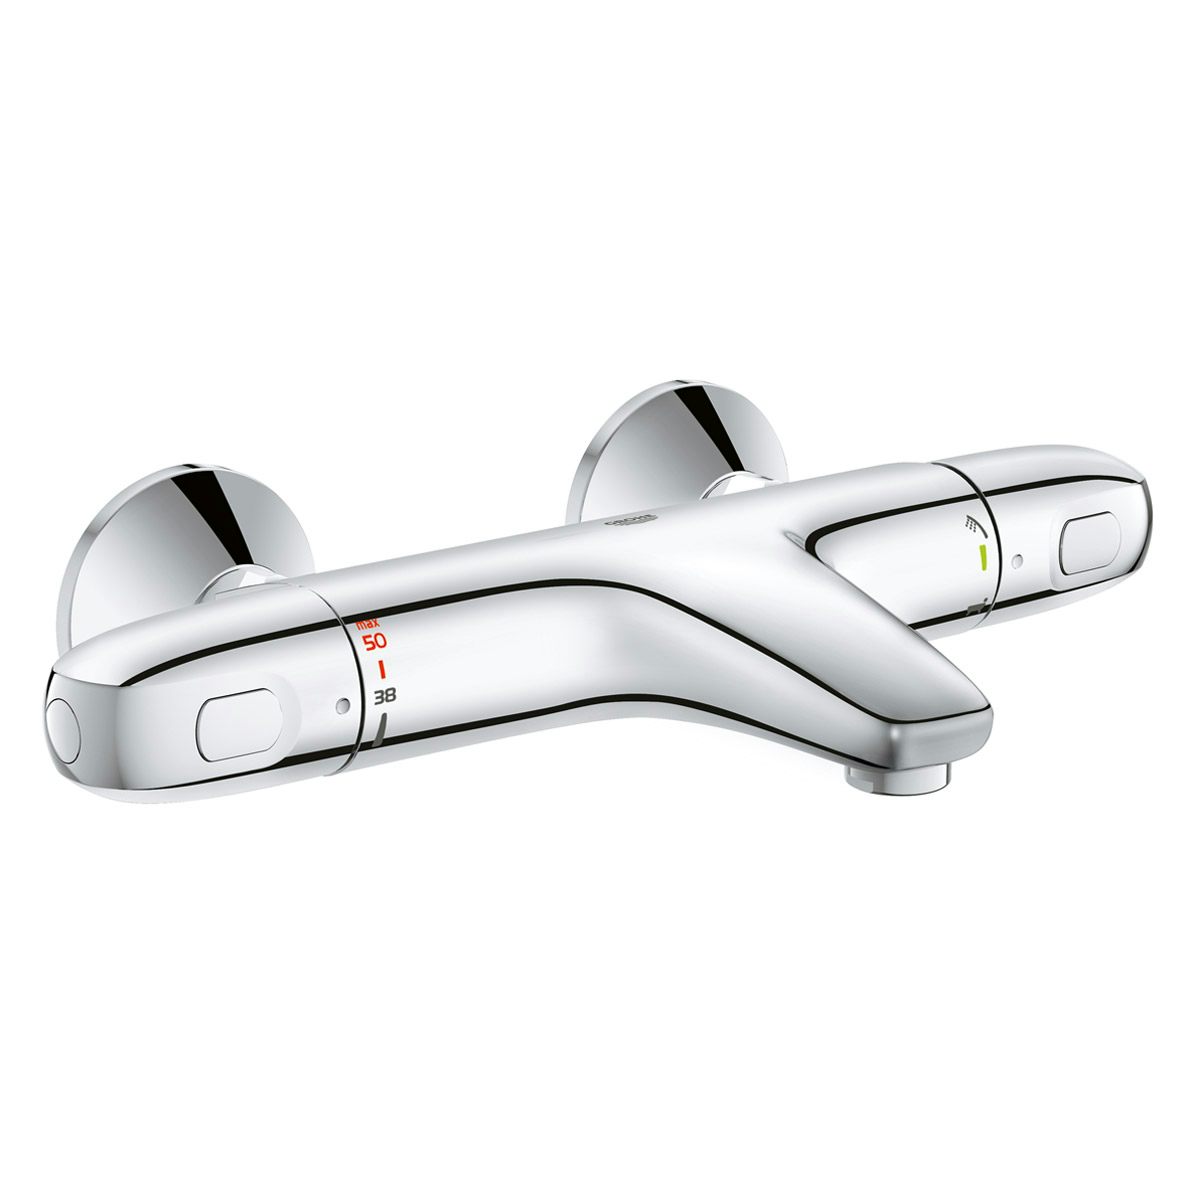 Grohe Grohtherm 1000 thermostatic bath shower mixer tap